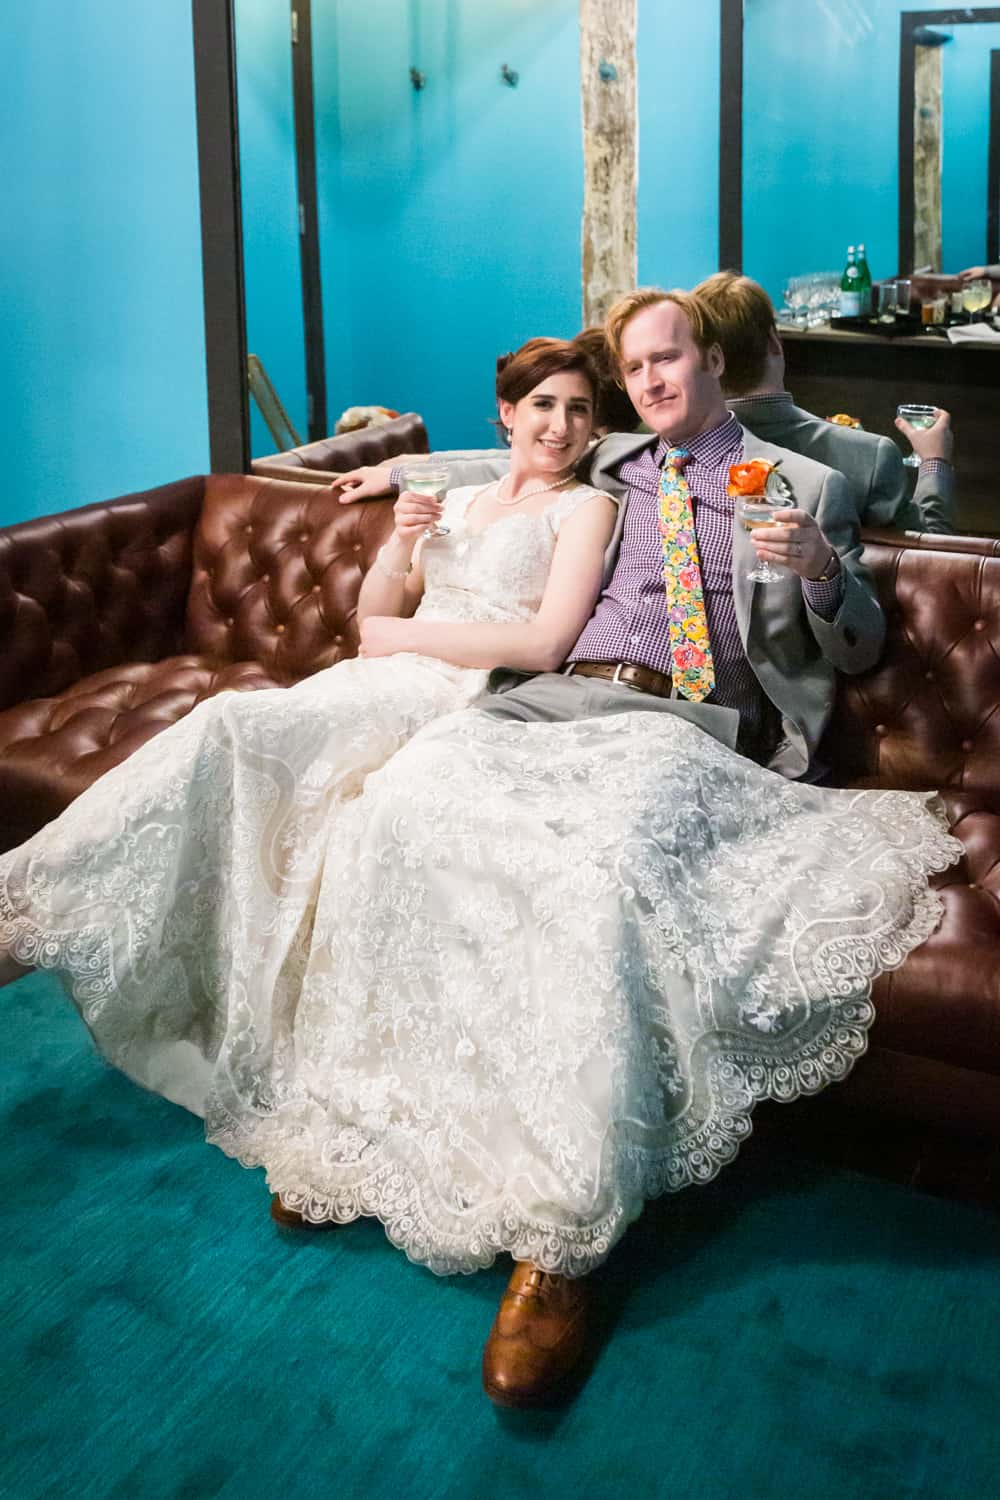 Bride and groom holding cocktails and lounging on couch at a Greenpoint Loft wedding